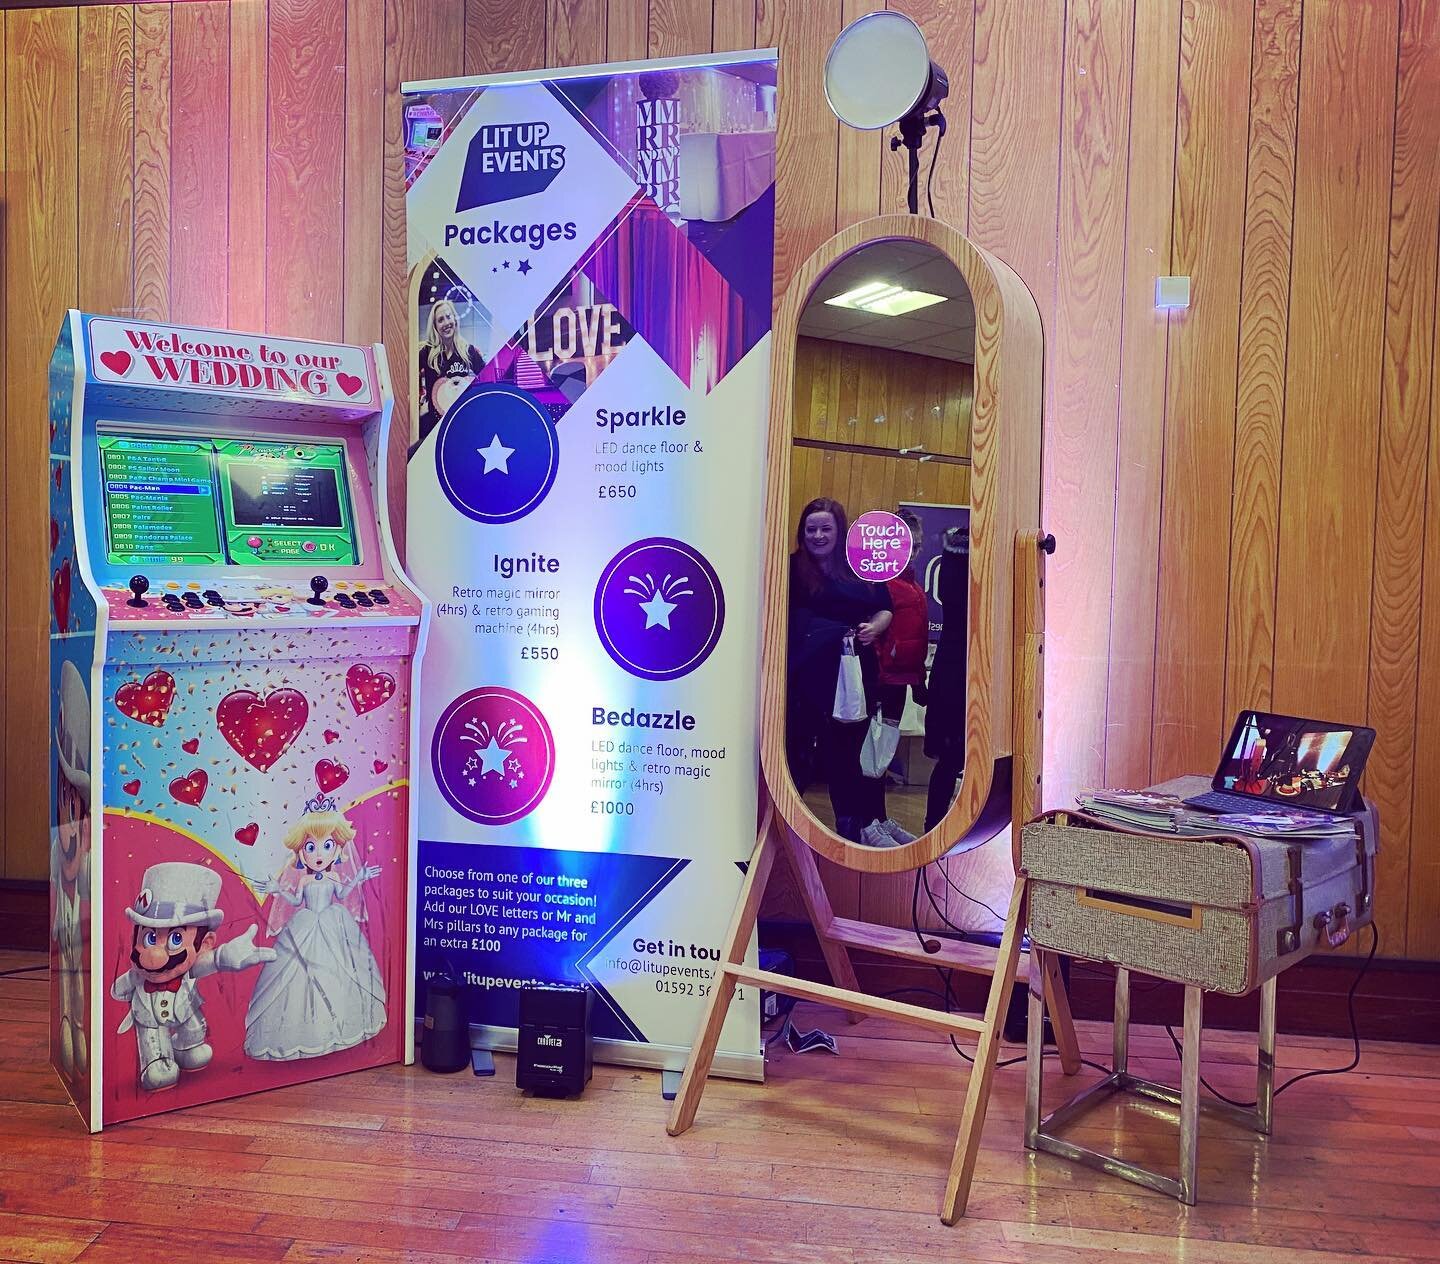 Today we are @astkdy #weddingexhibition here until 3pm. Come and discuss how we can light up your Wedding